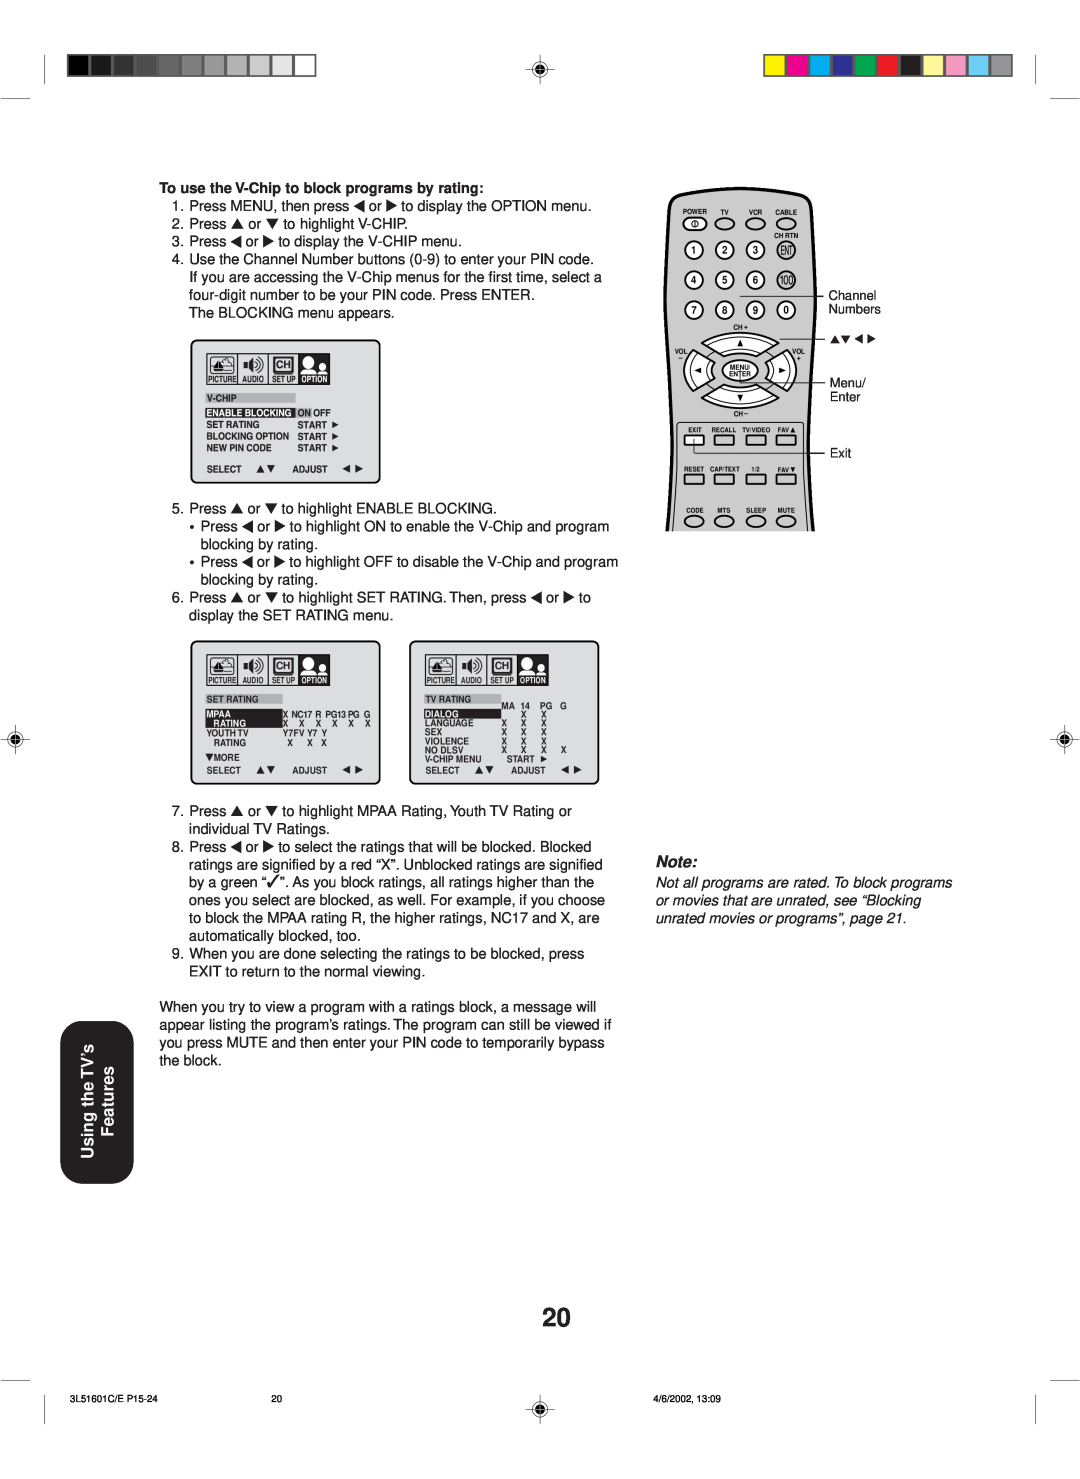 Toshiba TV 27A42 appendix Using the TV’s Features, To use the V-Chip to block programs by rating, Mpaa, Dialog, Rating 